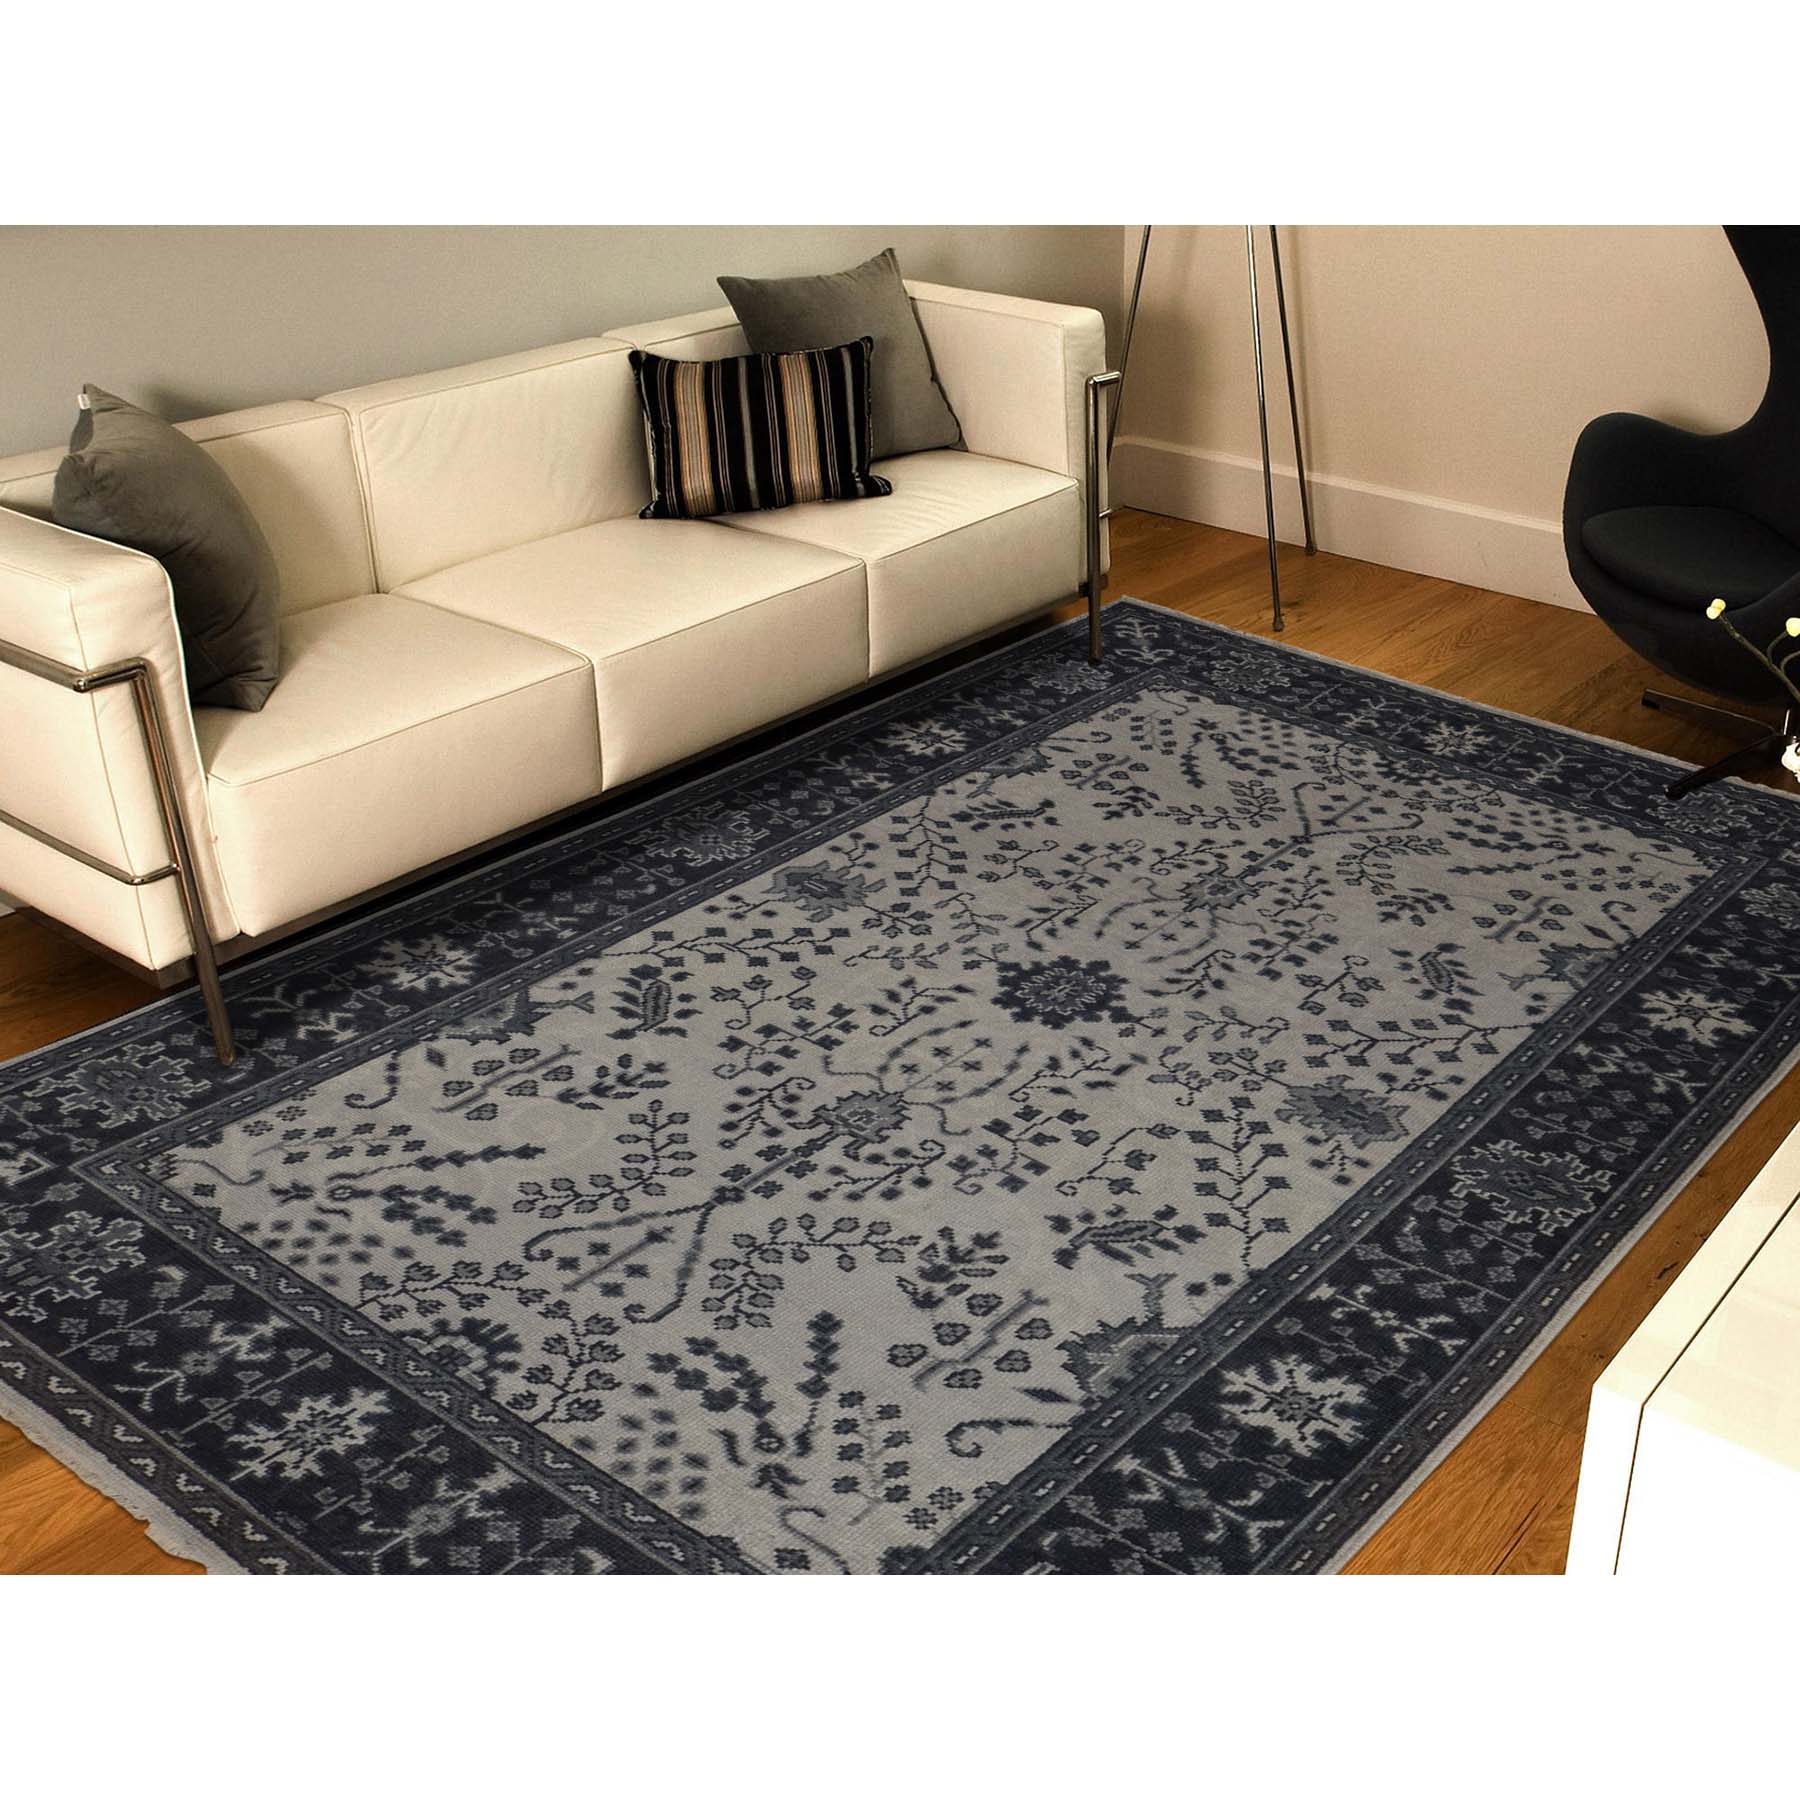 6-x9- Turkish Knot Oushak Sarouk Design Cropped Thin Hand-Knotted Oriental Rug 